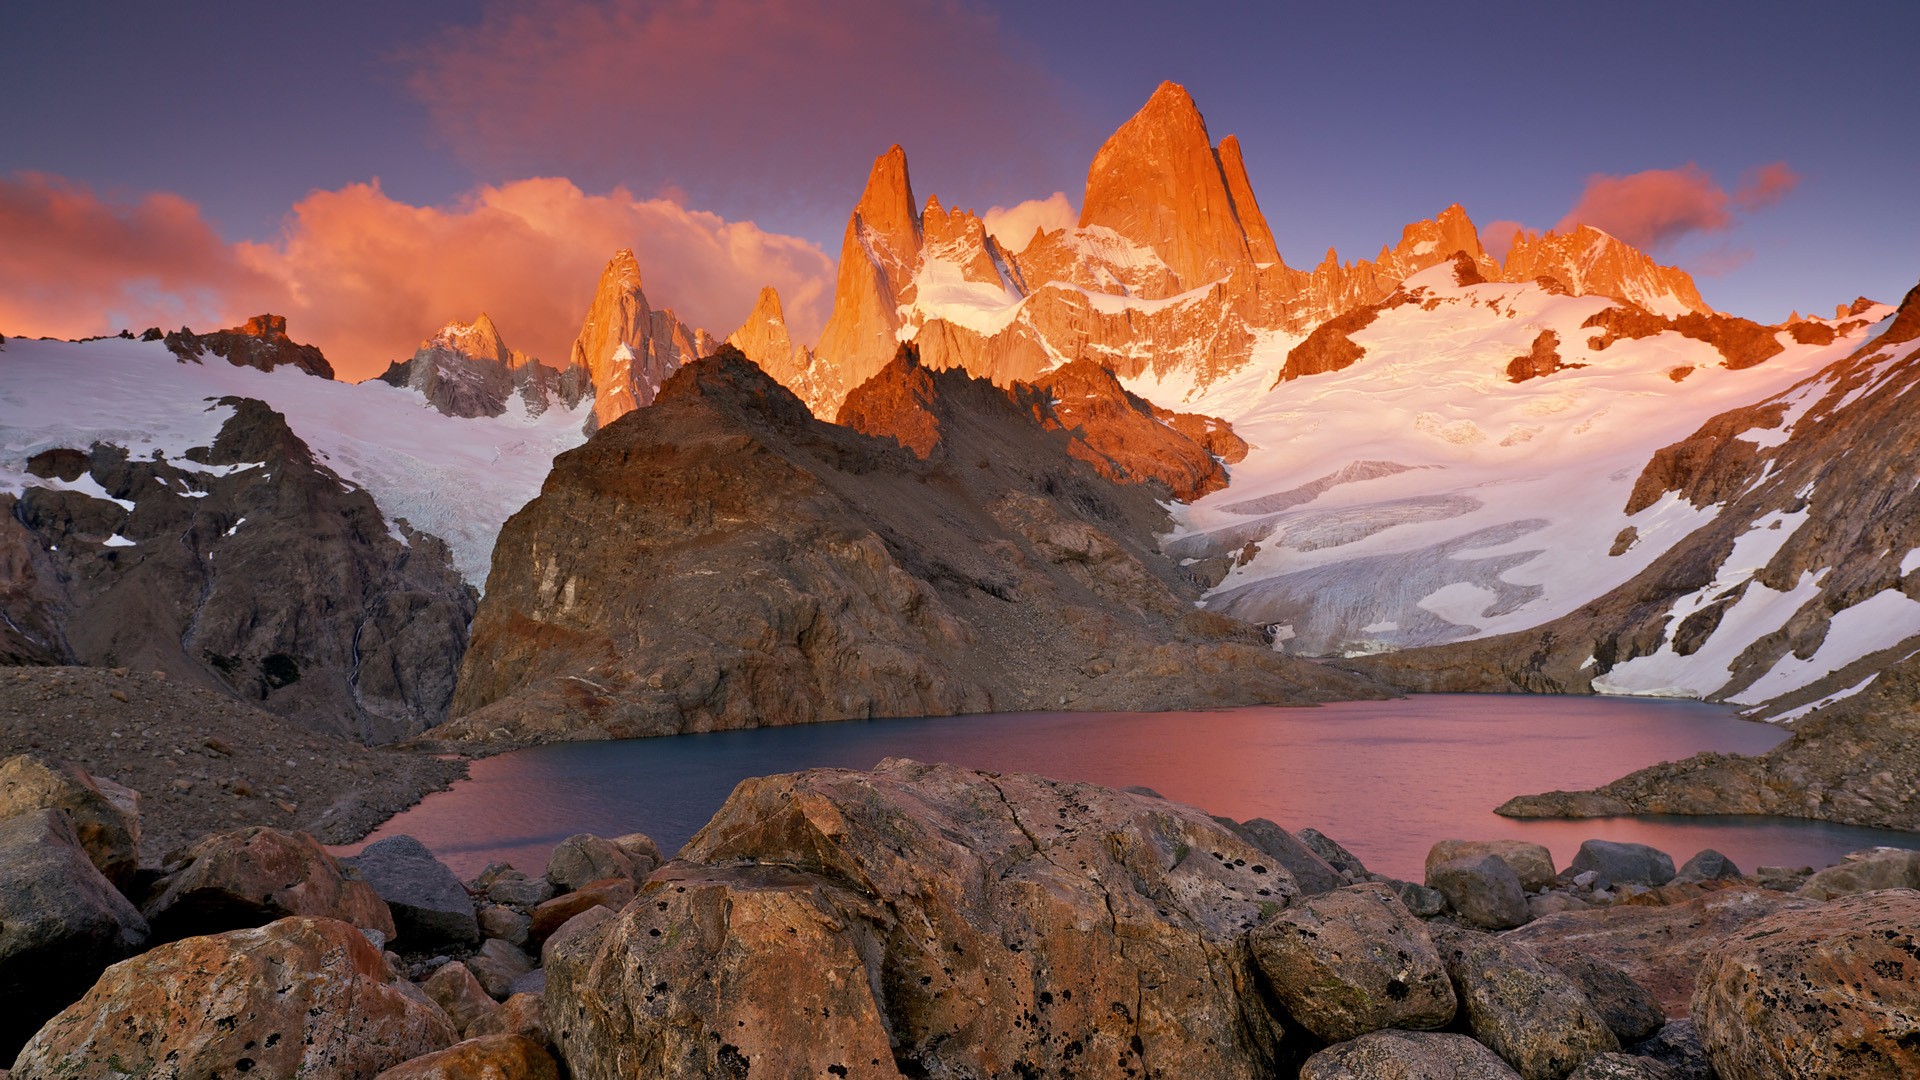 General 1920x1080 nature landscape mountains snow rocks Chile South America sunset clouds water lake